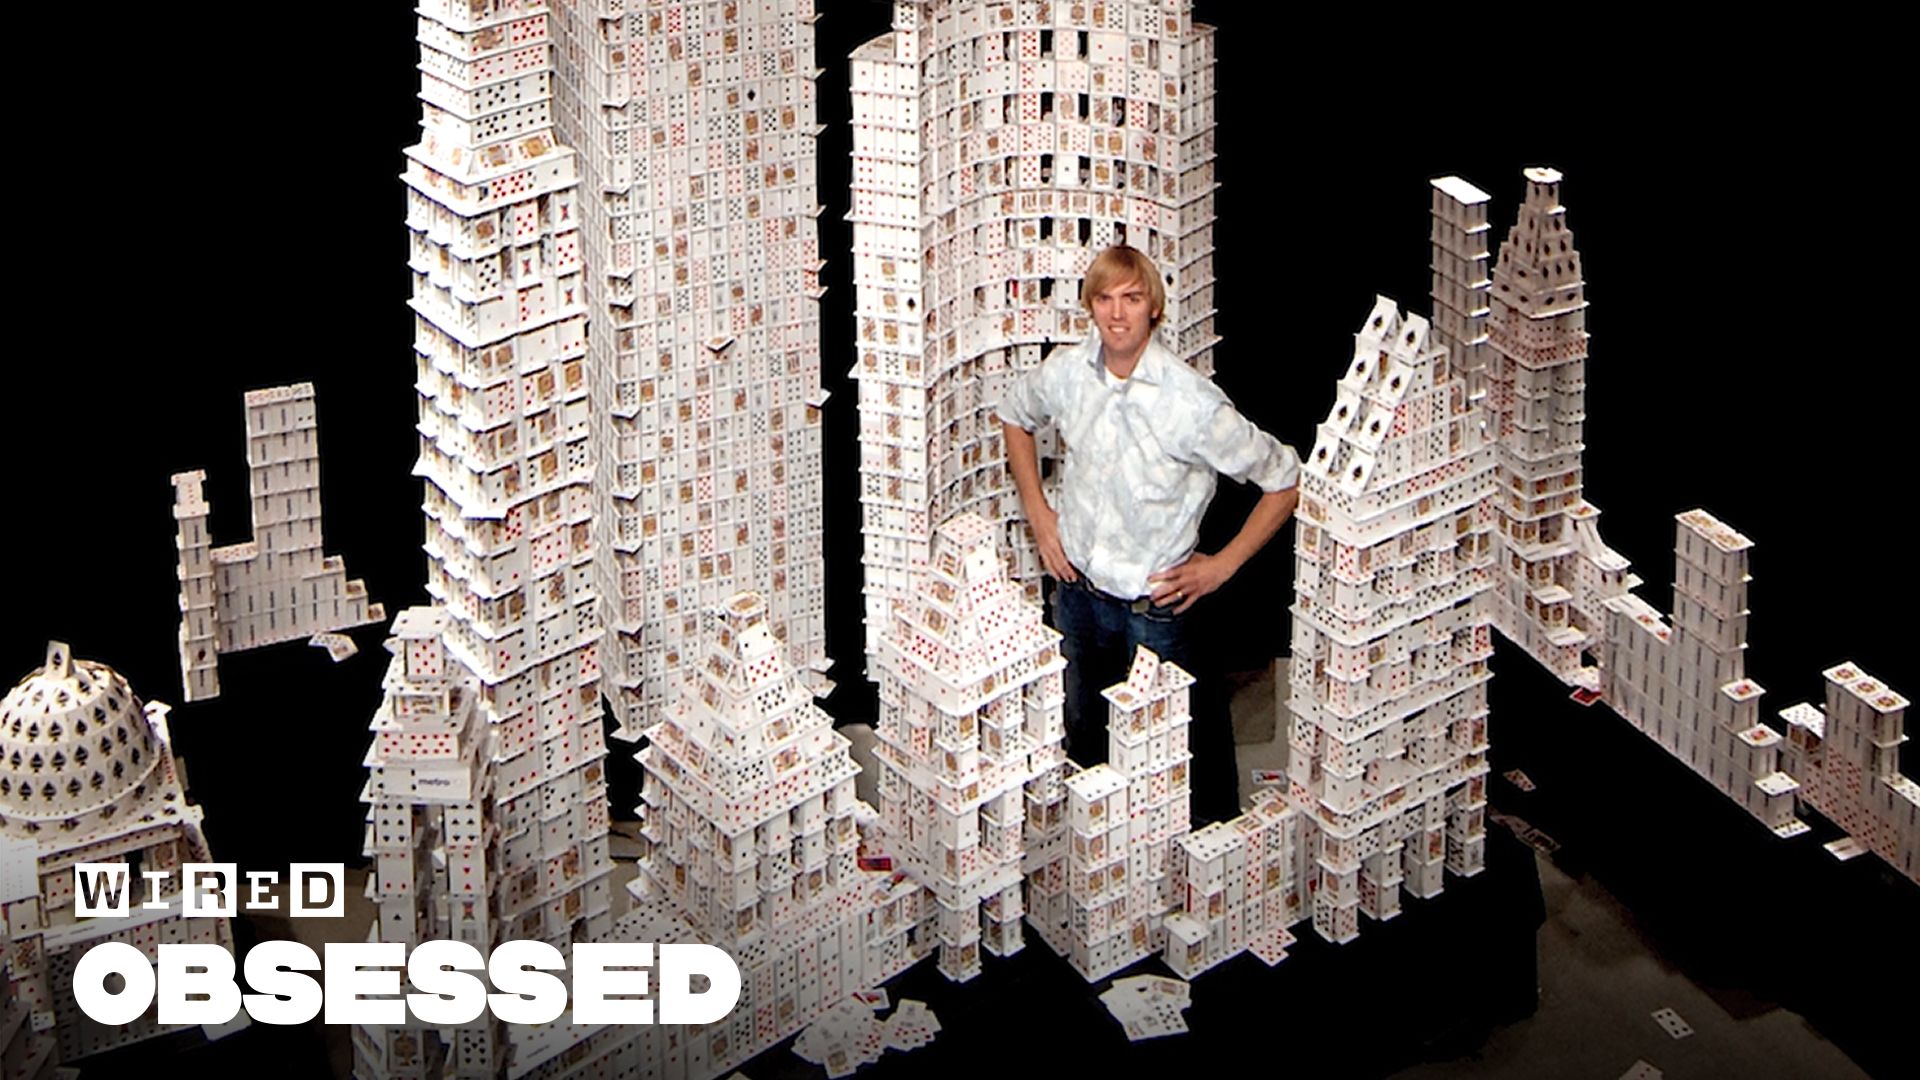 Watch How This Guy Stacks Playing Cards Impossibly High, Obsessed